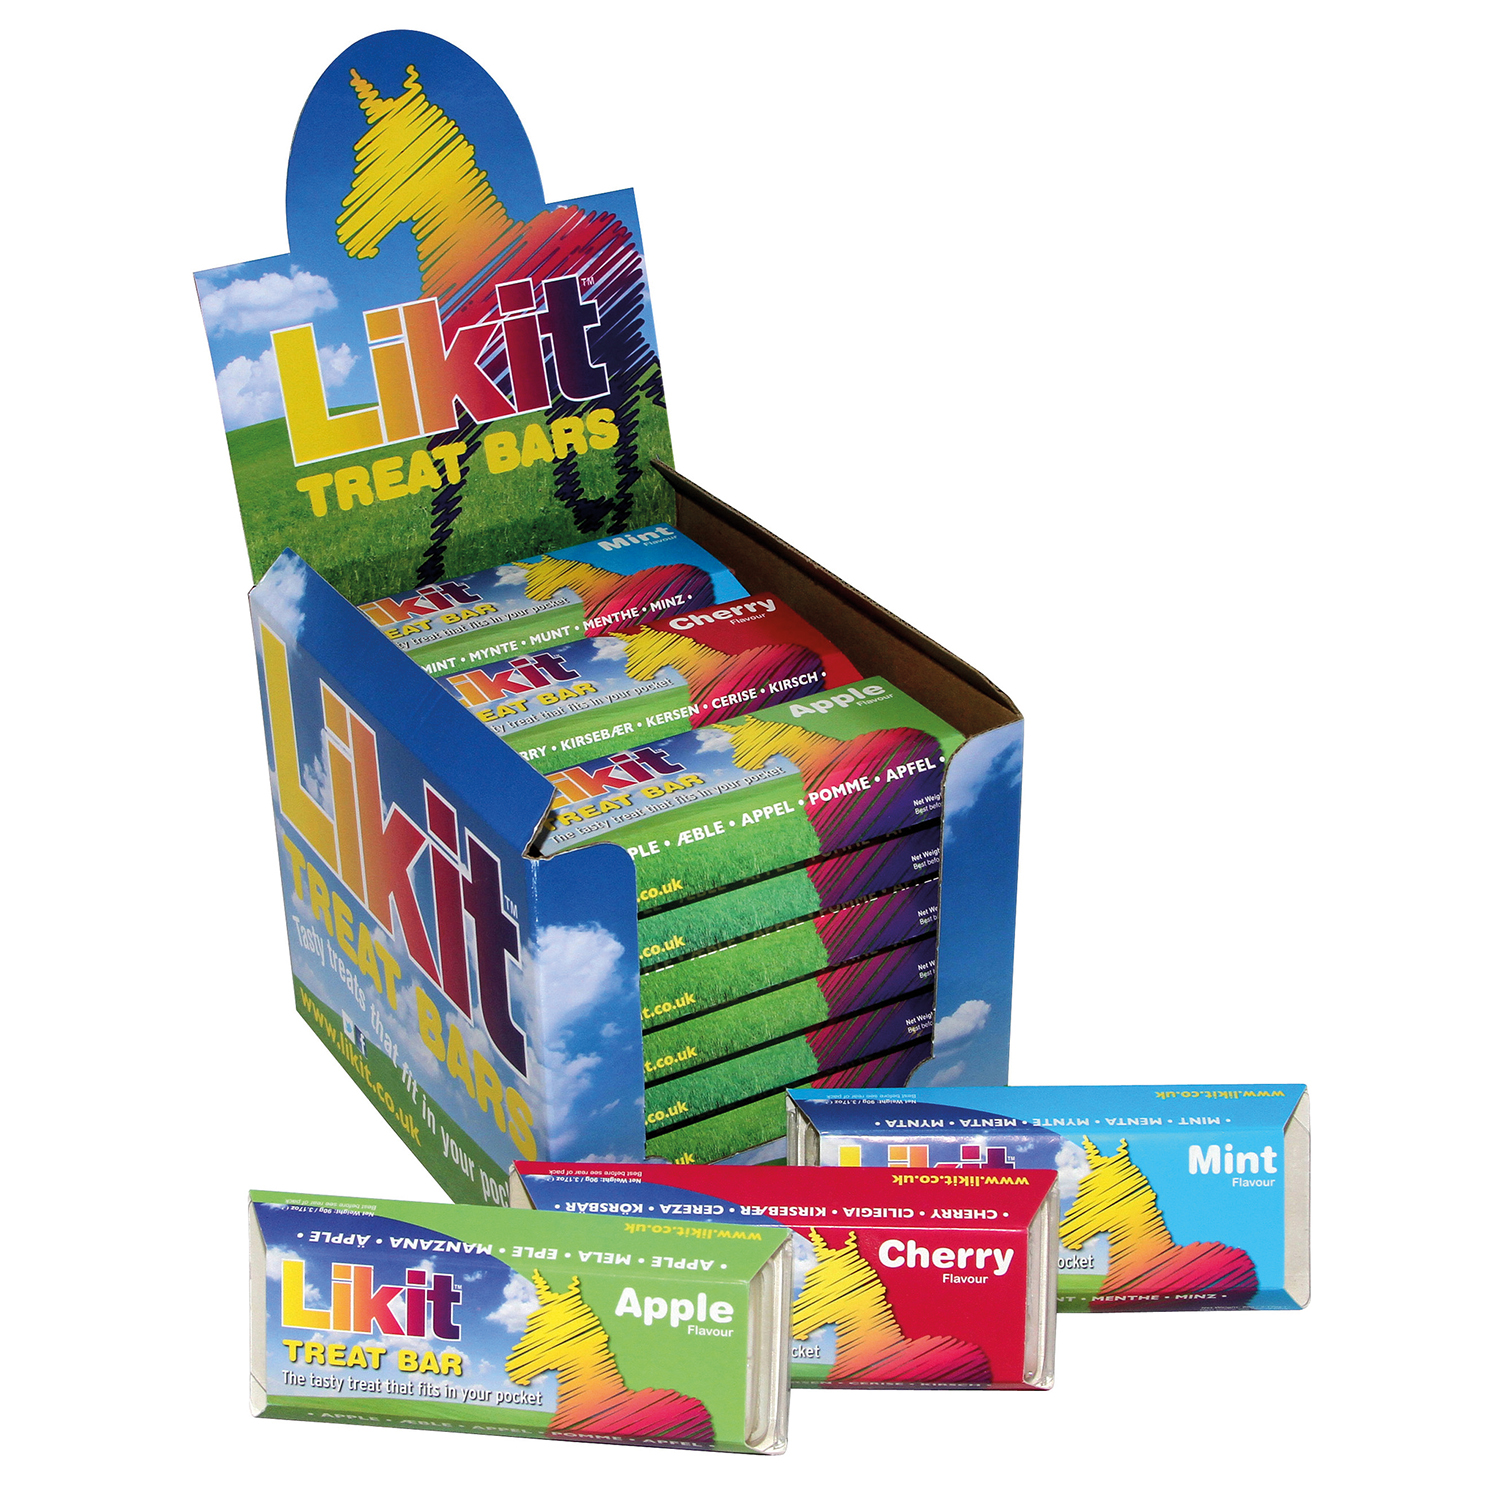 LIKIT TREAT BAR ASSORTED FLAVOURS 24 PACK ASSORTED FLAVOURS